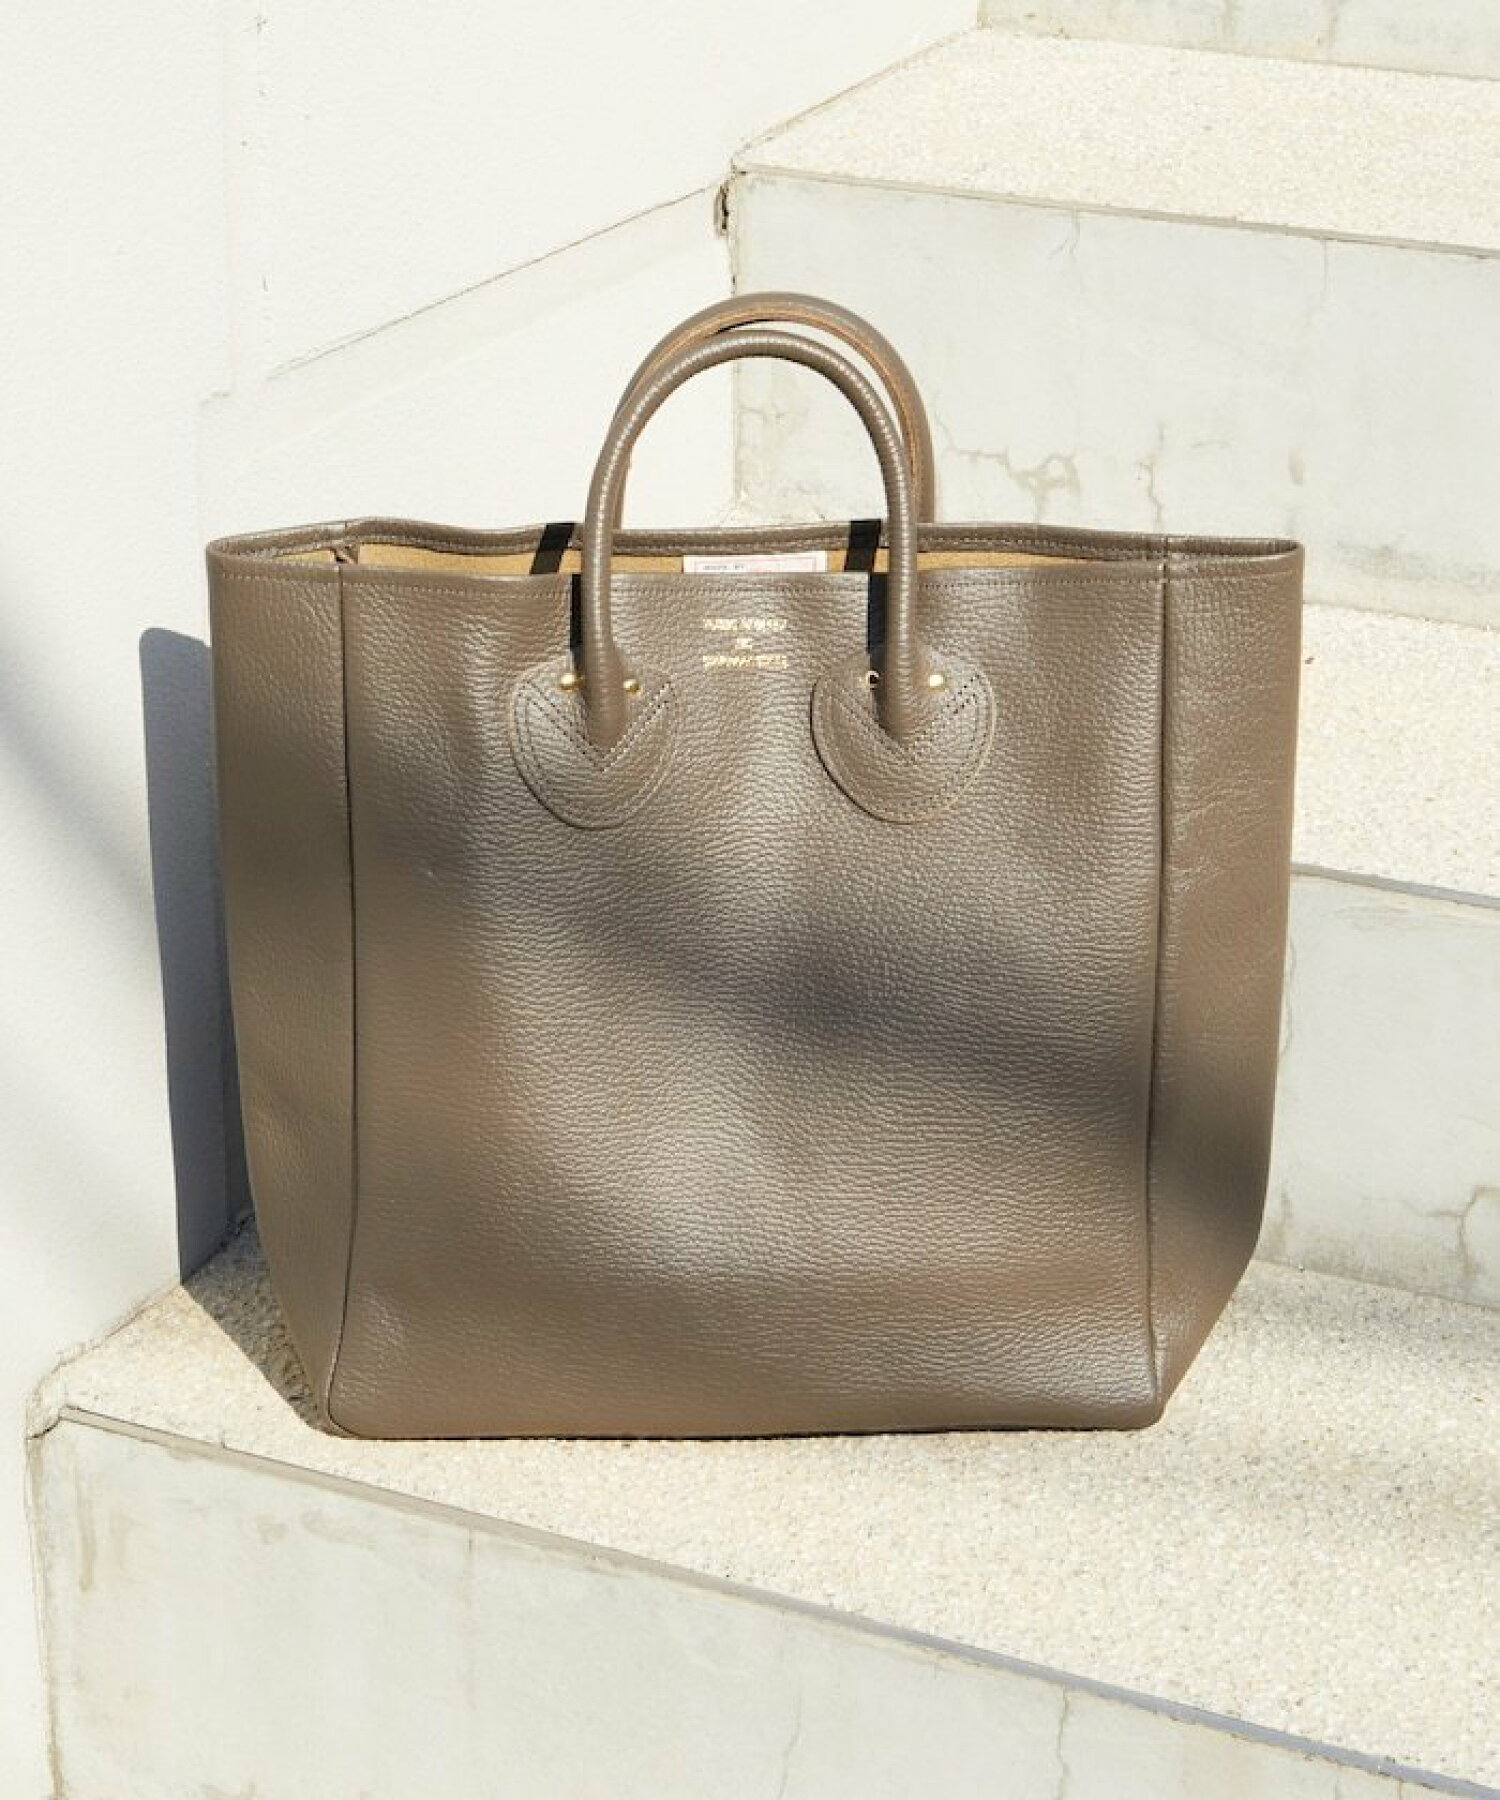 EMBOSSED LEATHER TOTE M/エンボスレザートートバッグ 限定展開